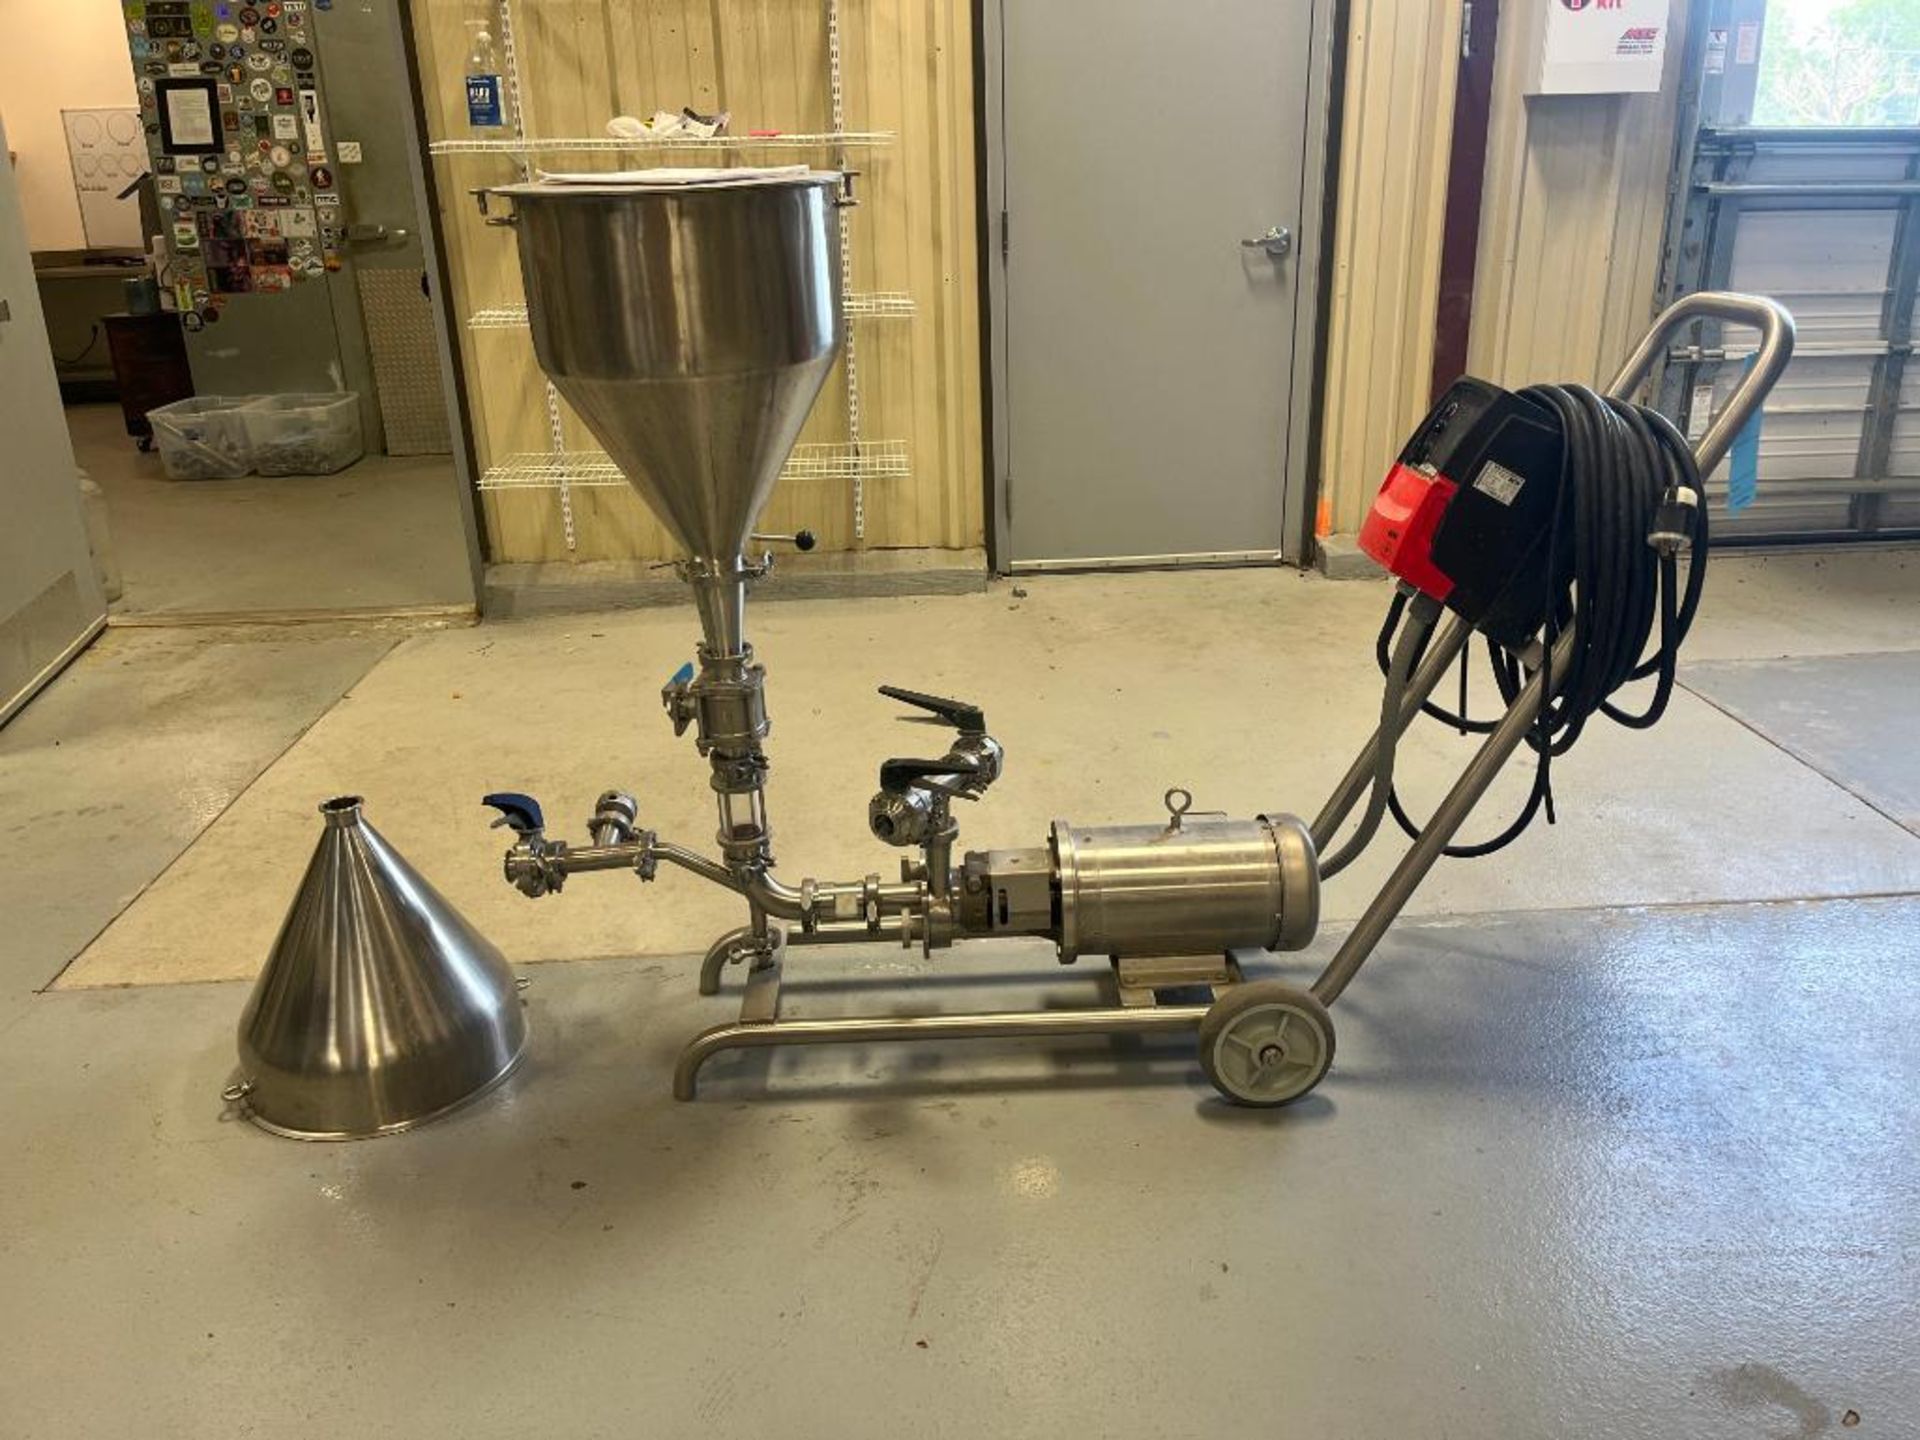 Ampco Stainless Steel Portable Centrifugal Pump. With a 5hp, 3/60/230/460 volt, 3500 rpm motor, Sew